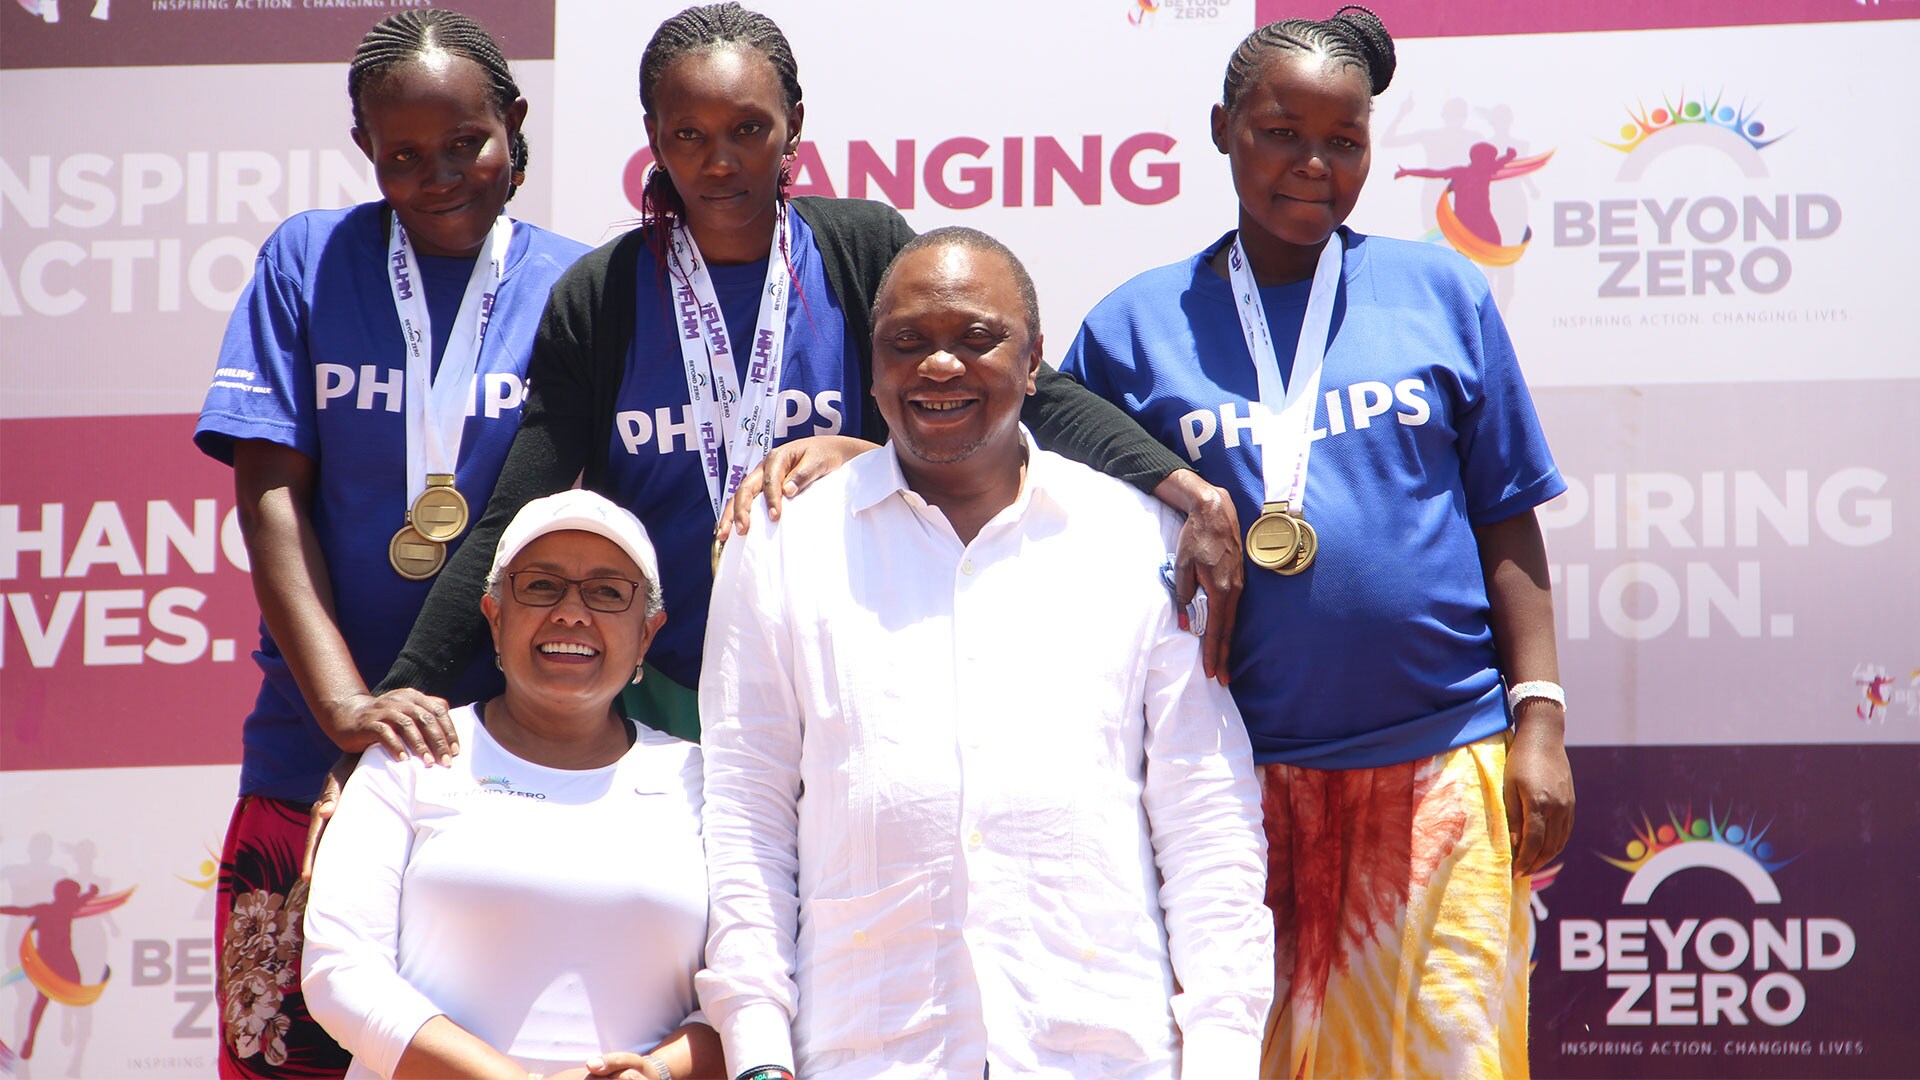 Pregnant women unite at the “Beyond Zero Marathon” to shine the spotlight on preventable maternal and infant deaths in Kenya